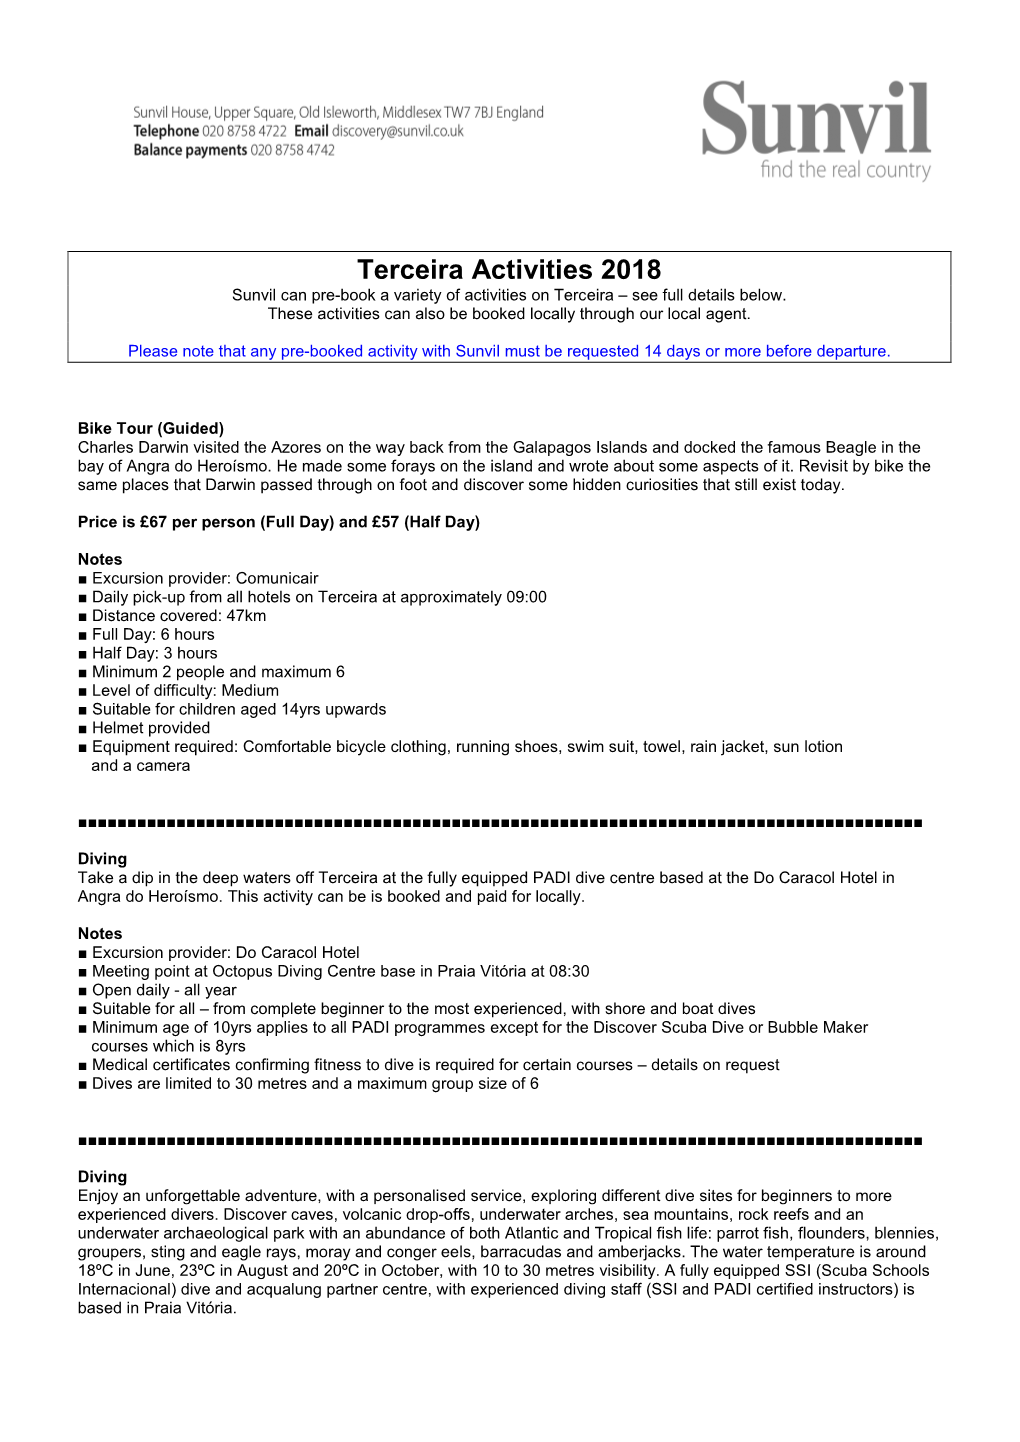 Terceira Activities 2018 Sunvil Can Pre�Book a Variety of Activities on Terceira – See Full Details Below